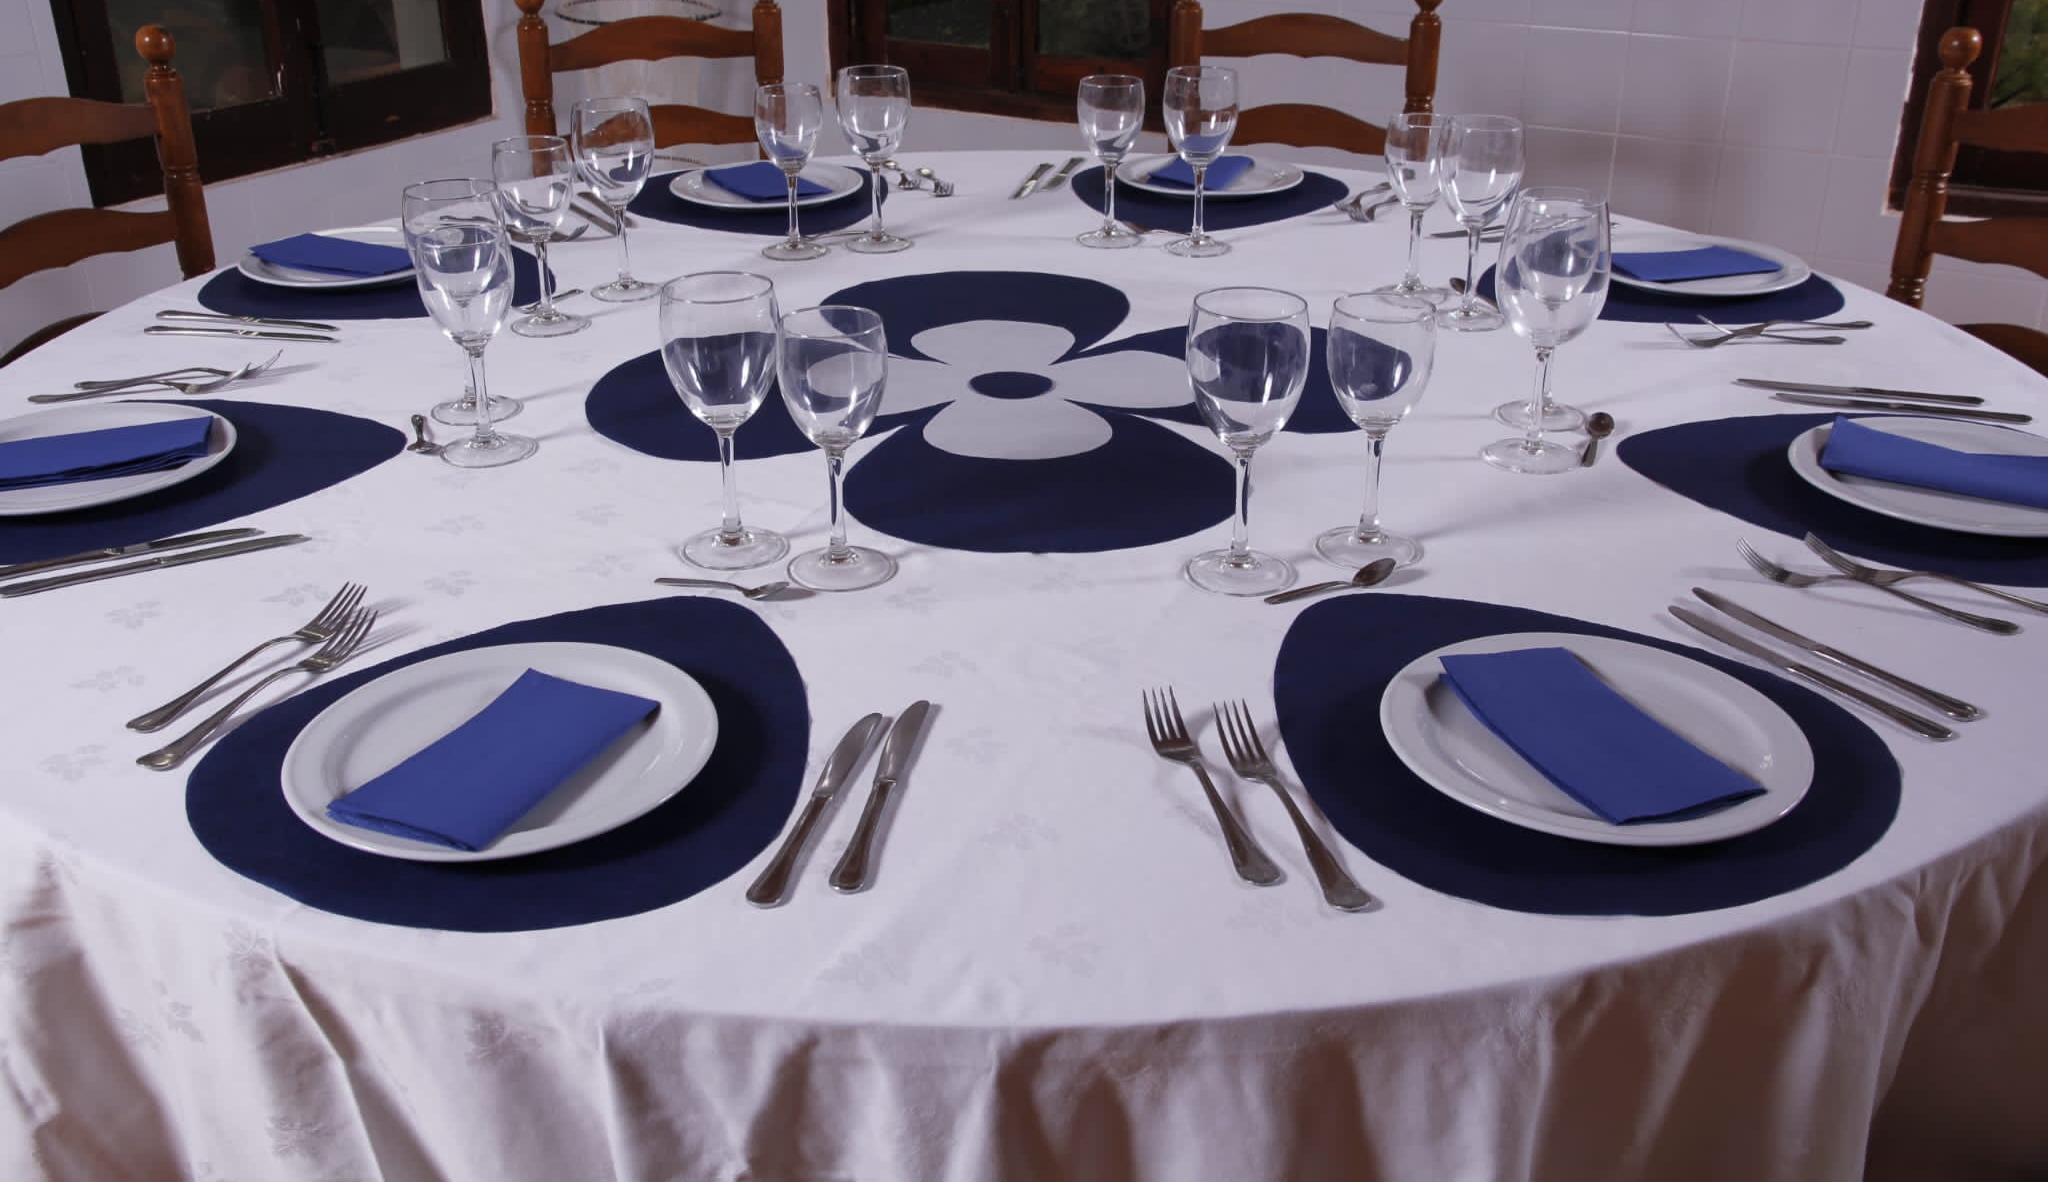 45562 - TABLE CLOTHS, RUNNERS AND TABLE CENTERS, ETC. Europe